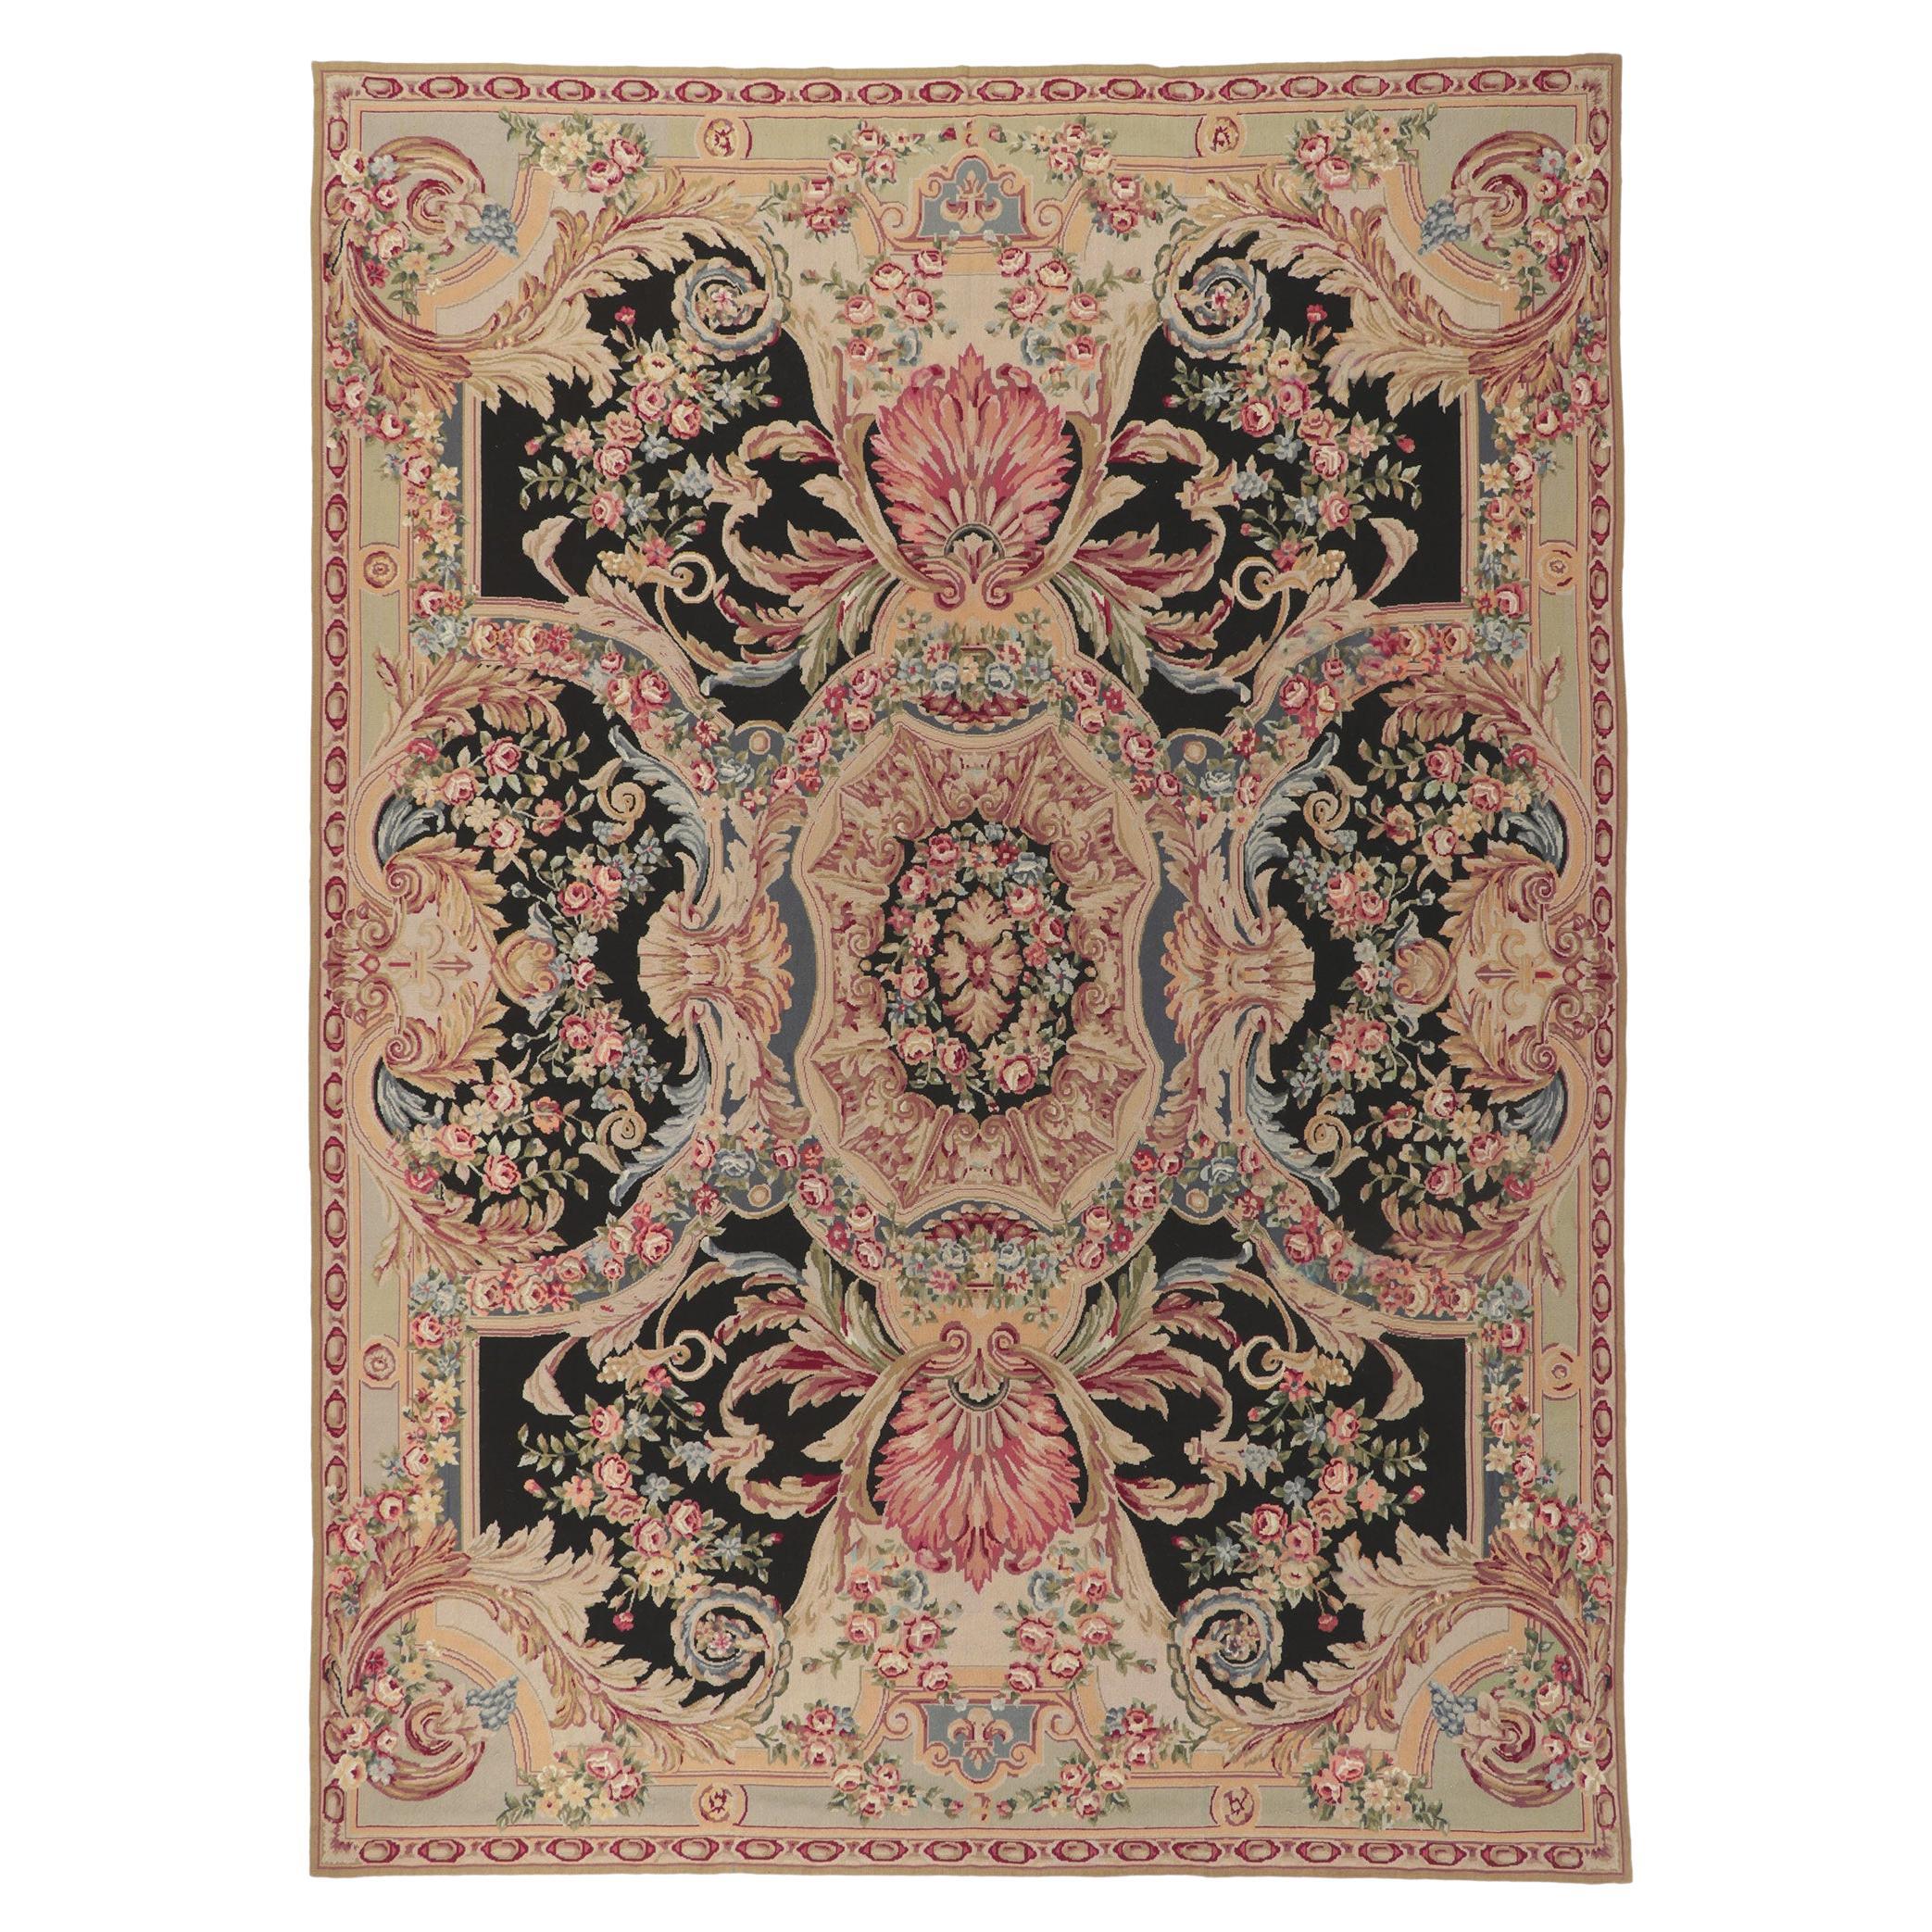 Vintage French Savonnerie Style Needlepoint Rug